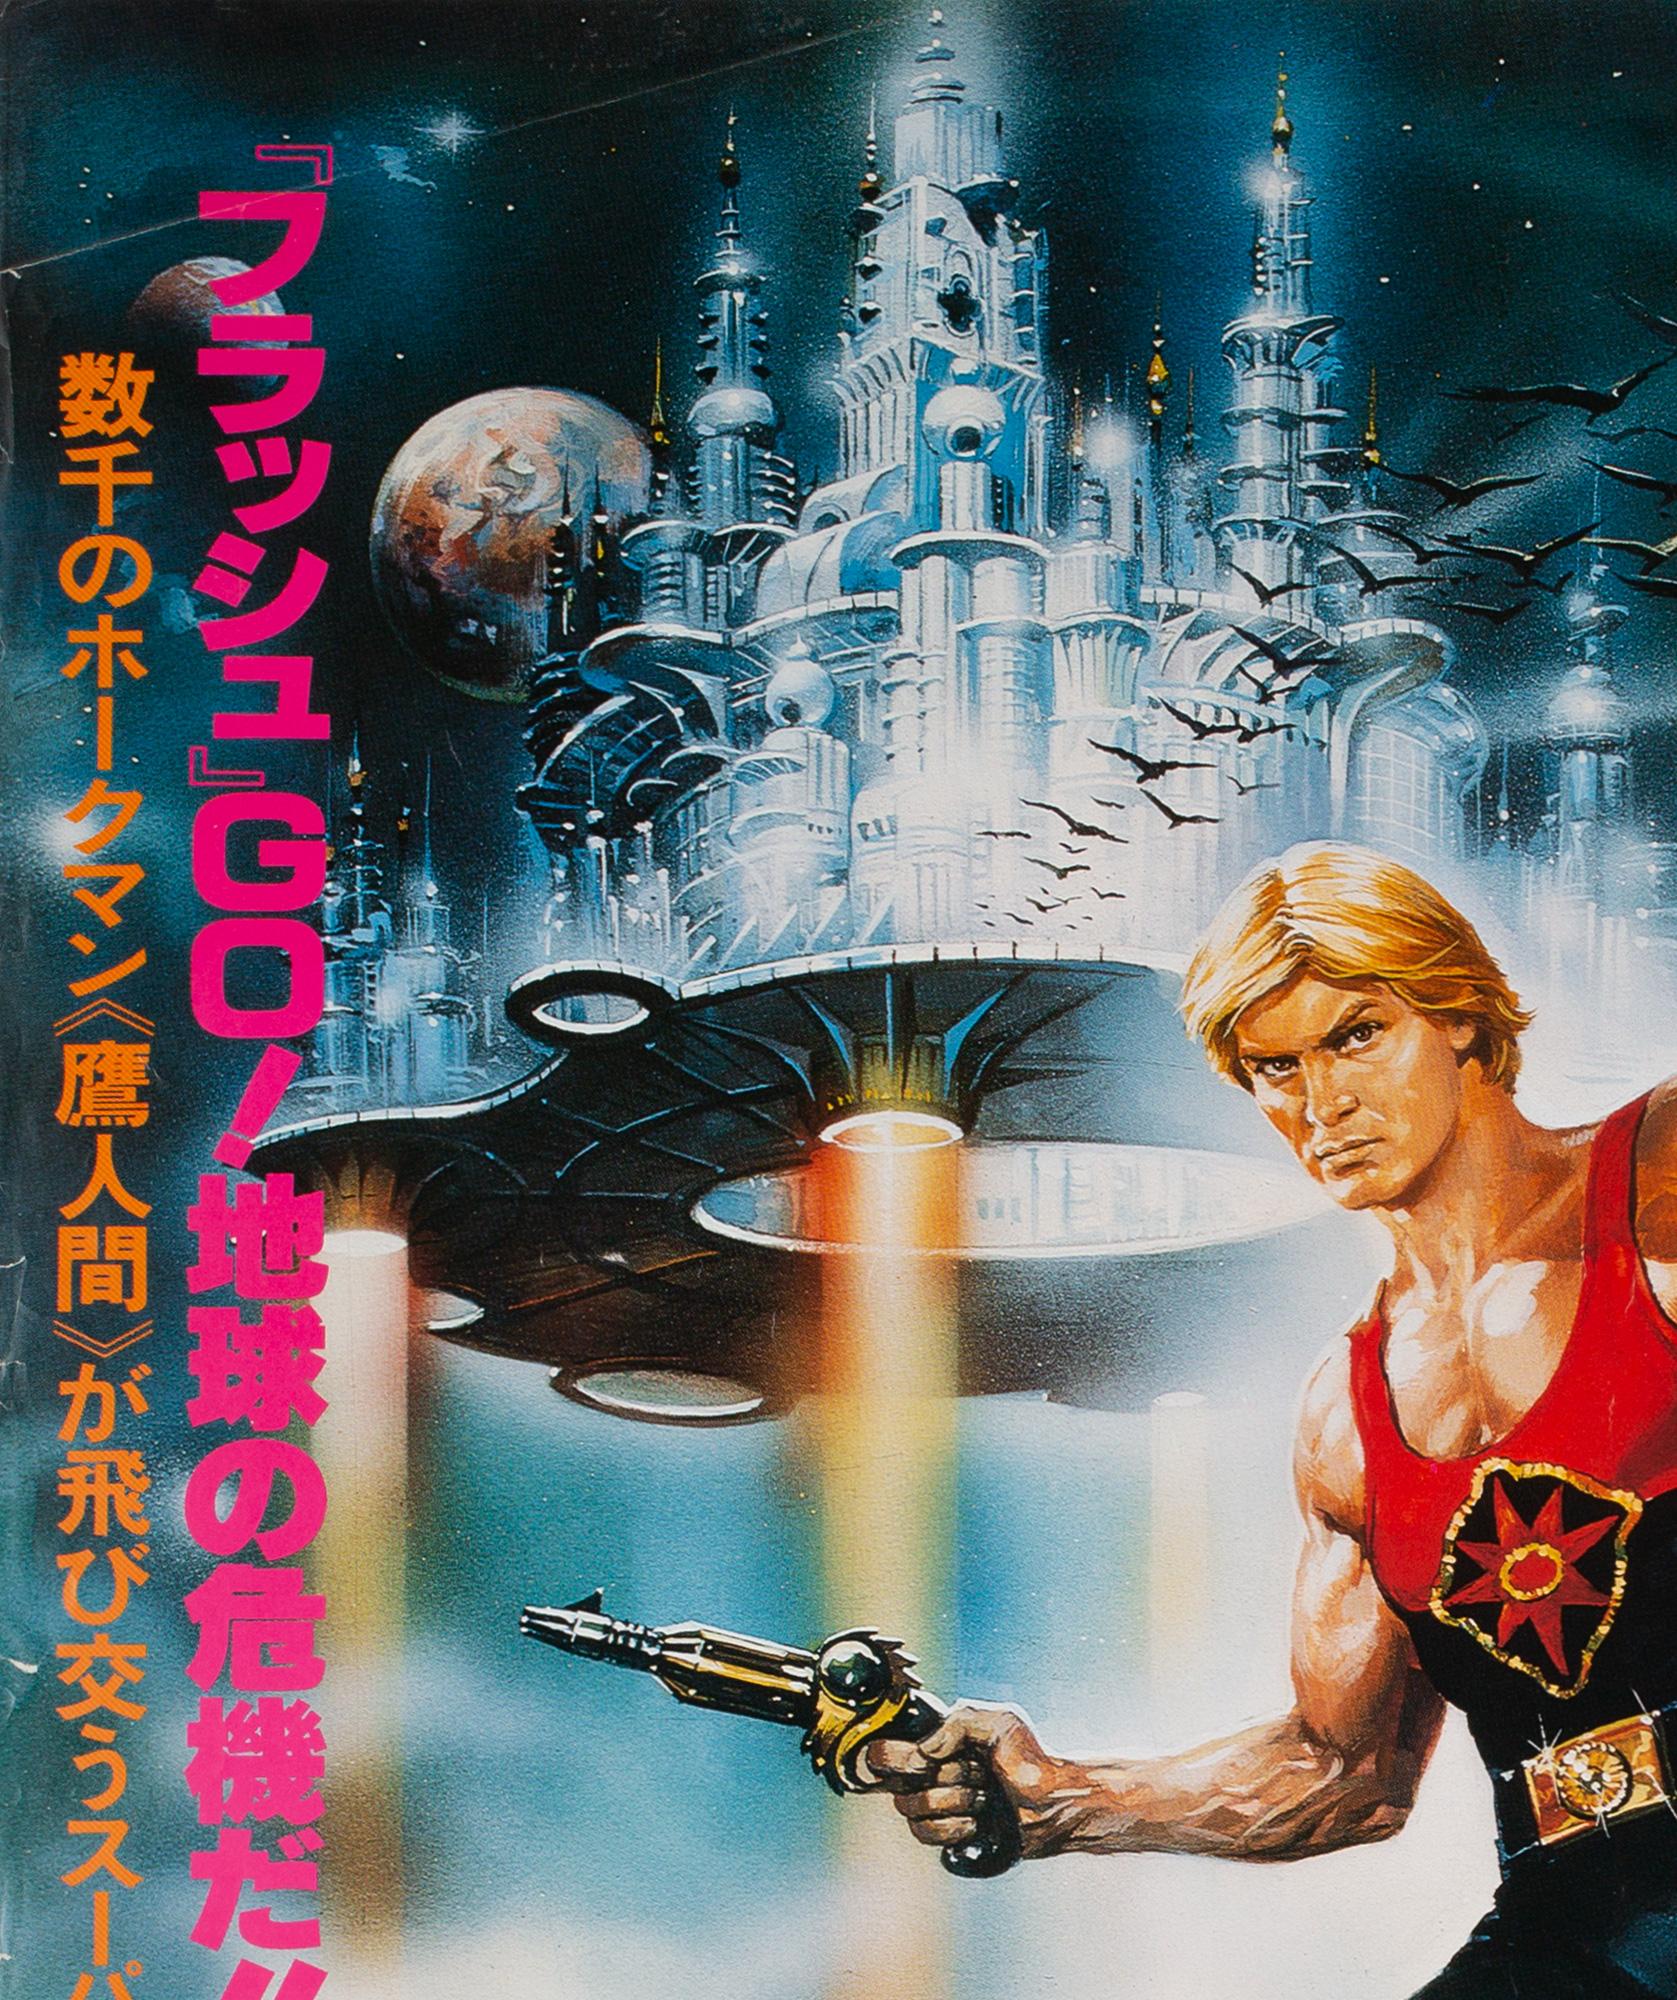 Renato Casaro's artwork looks fantastic on the Japanese original-year-of-release film poster for 1980s camp comic classic Flash Gordon, a guilty pleasure for many... ourselves included. The artwork looks even more impressive in this much rarer